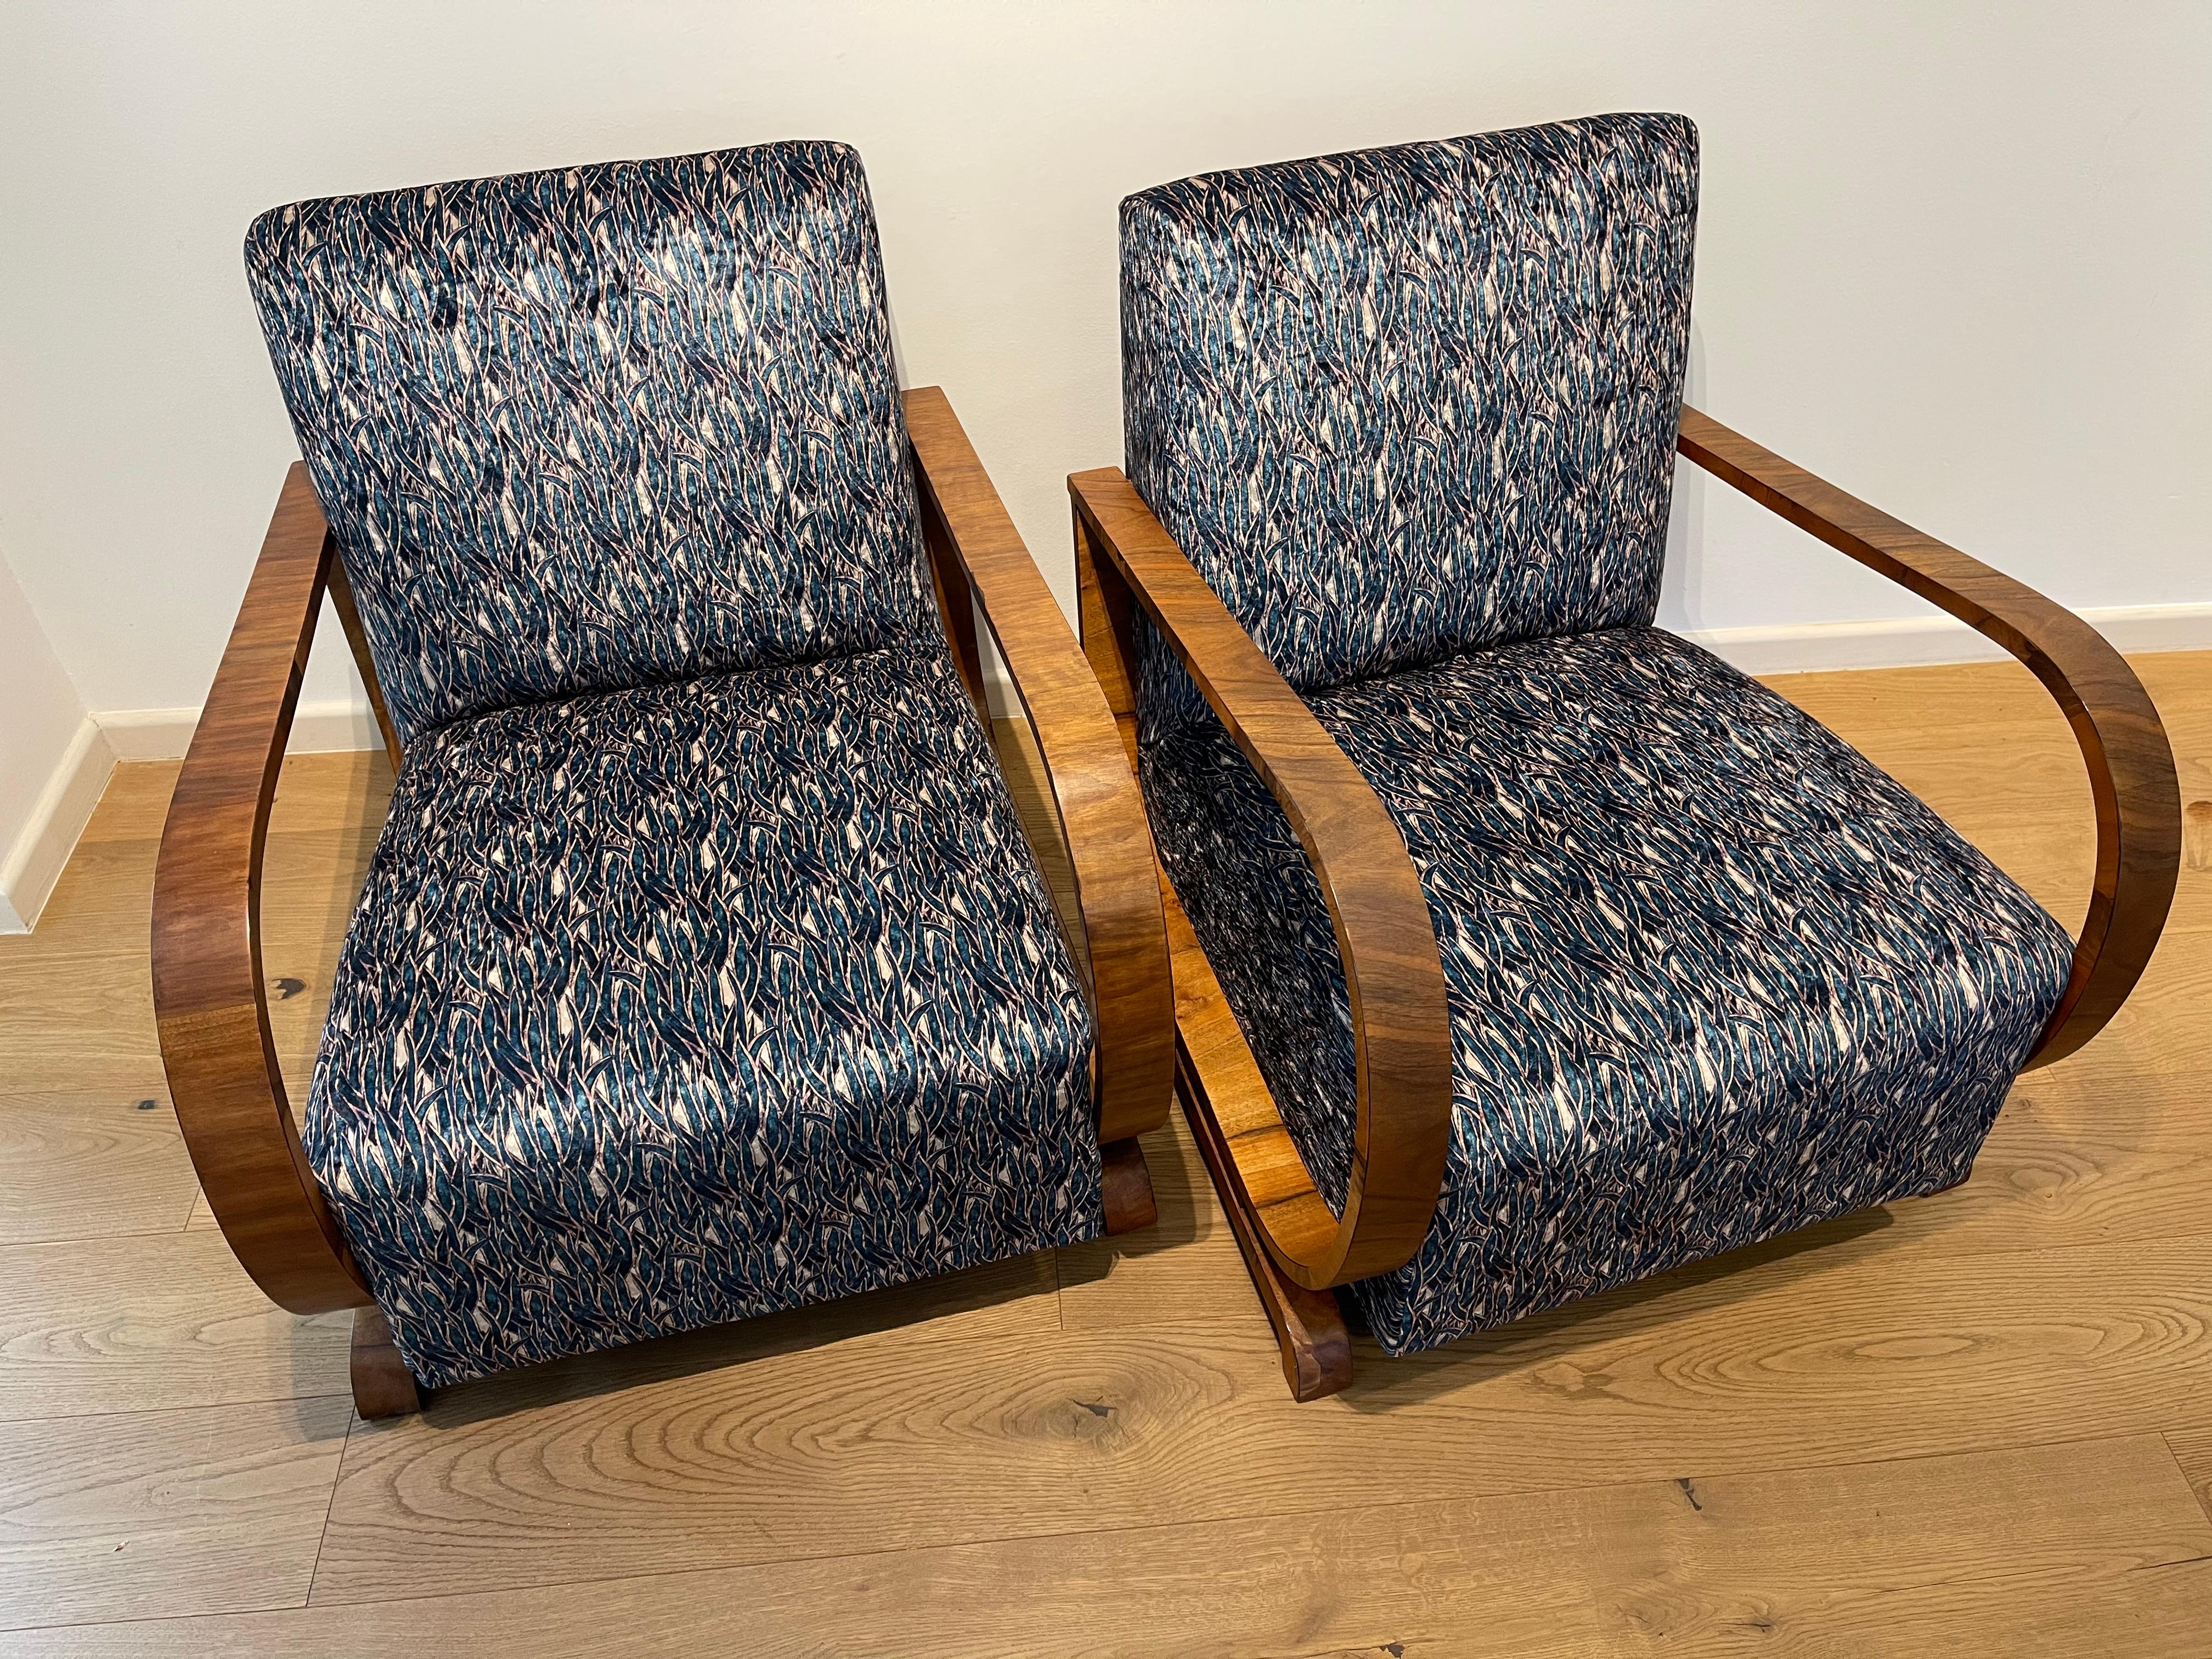 Art Deco Lounge Chairs, France, 1930, Set of 2